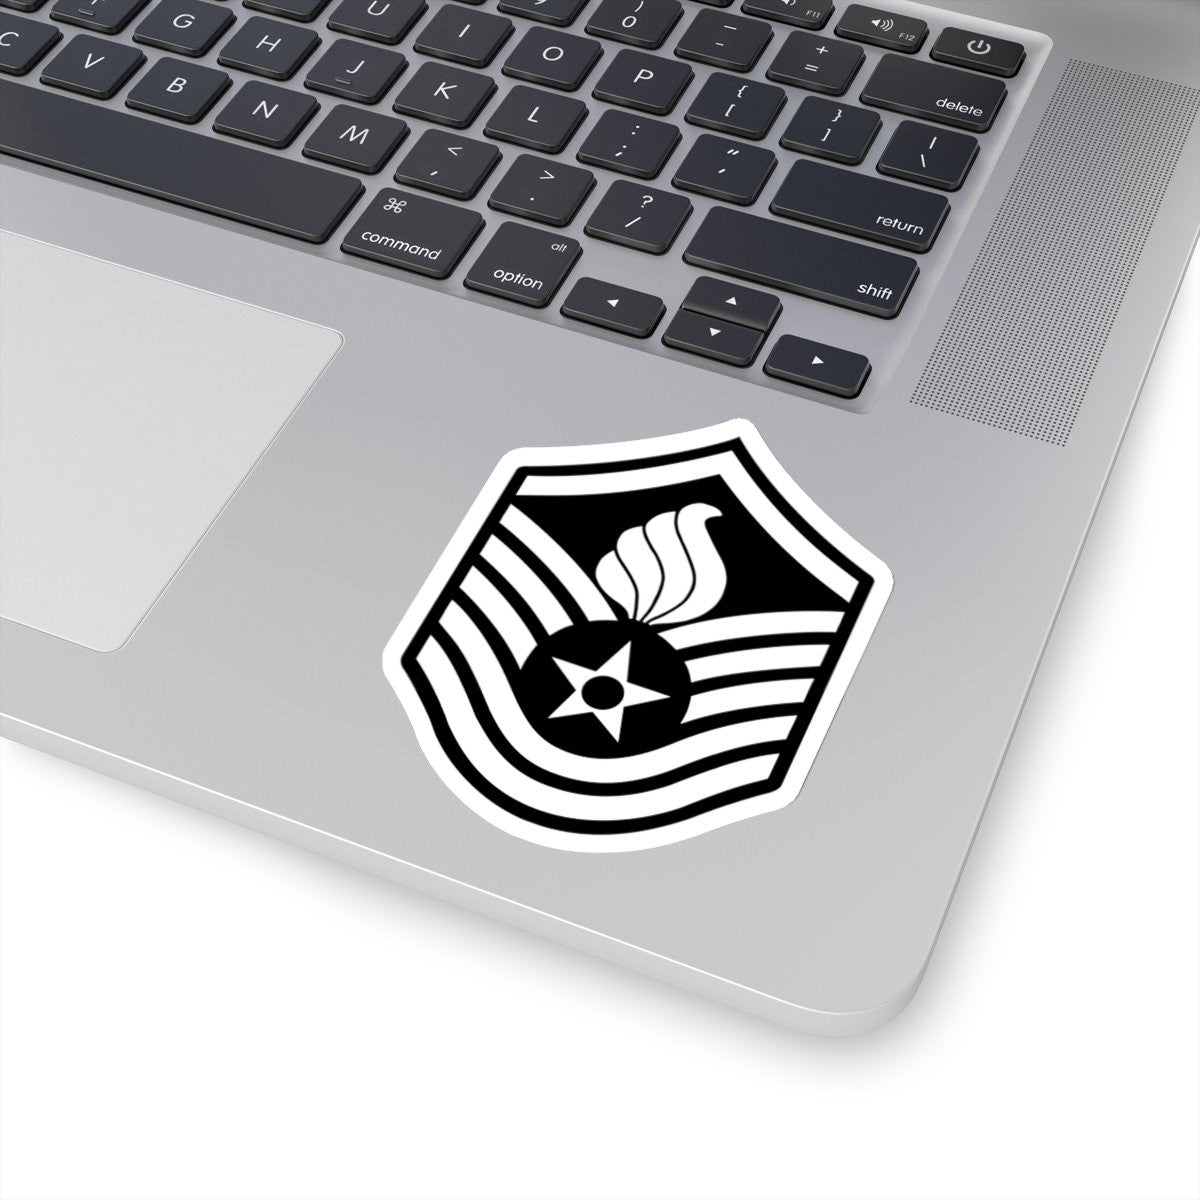 USAF AMMO Master Sergeant MSgt E-7 Rank Black and White Kiss-Cut Vinyl Indoor Stickers